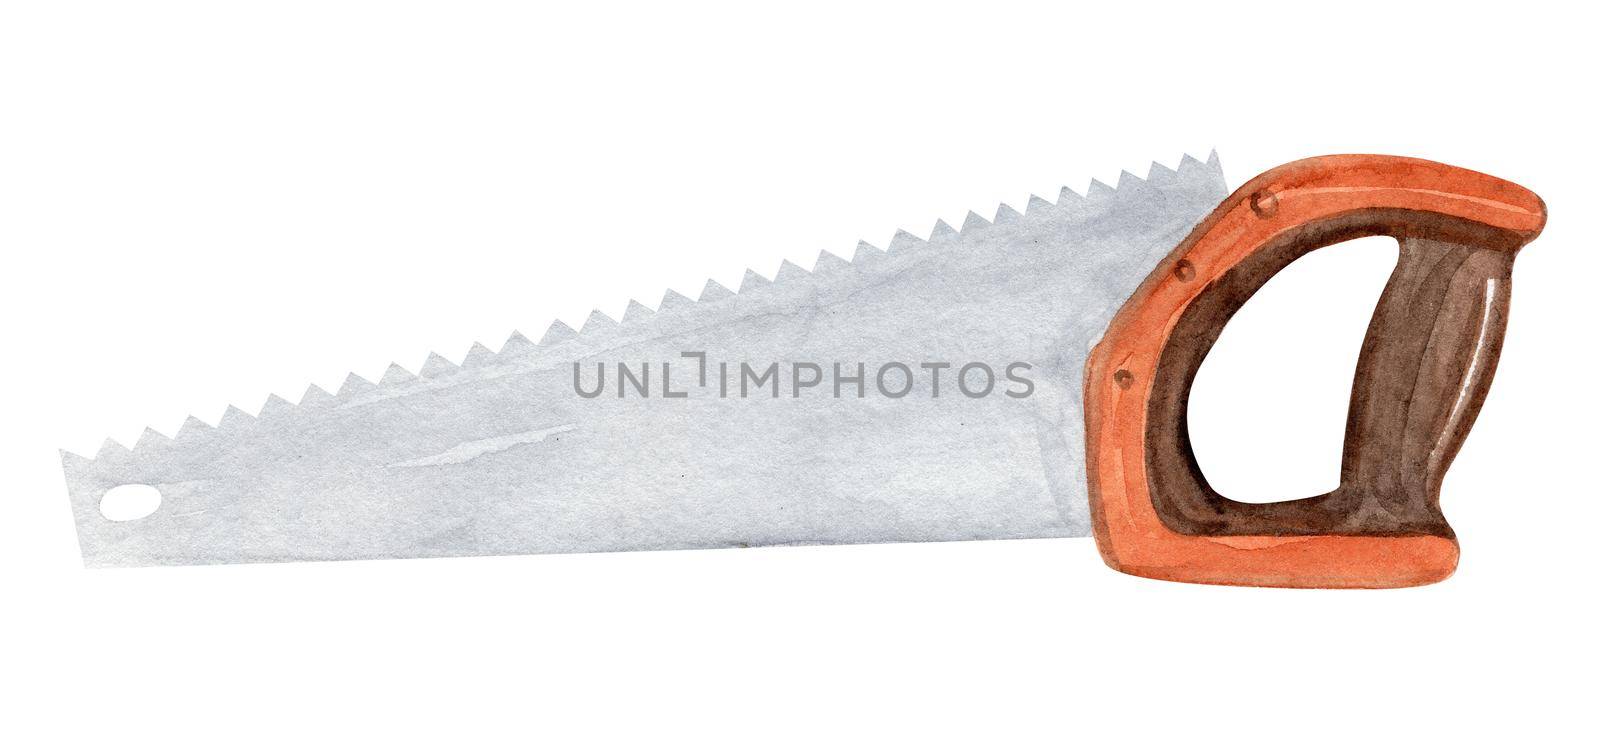 Watercolor orange saw tool isolated on white by dreamloud